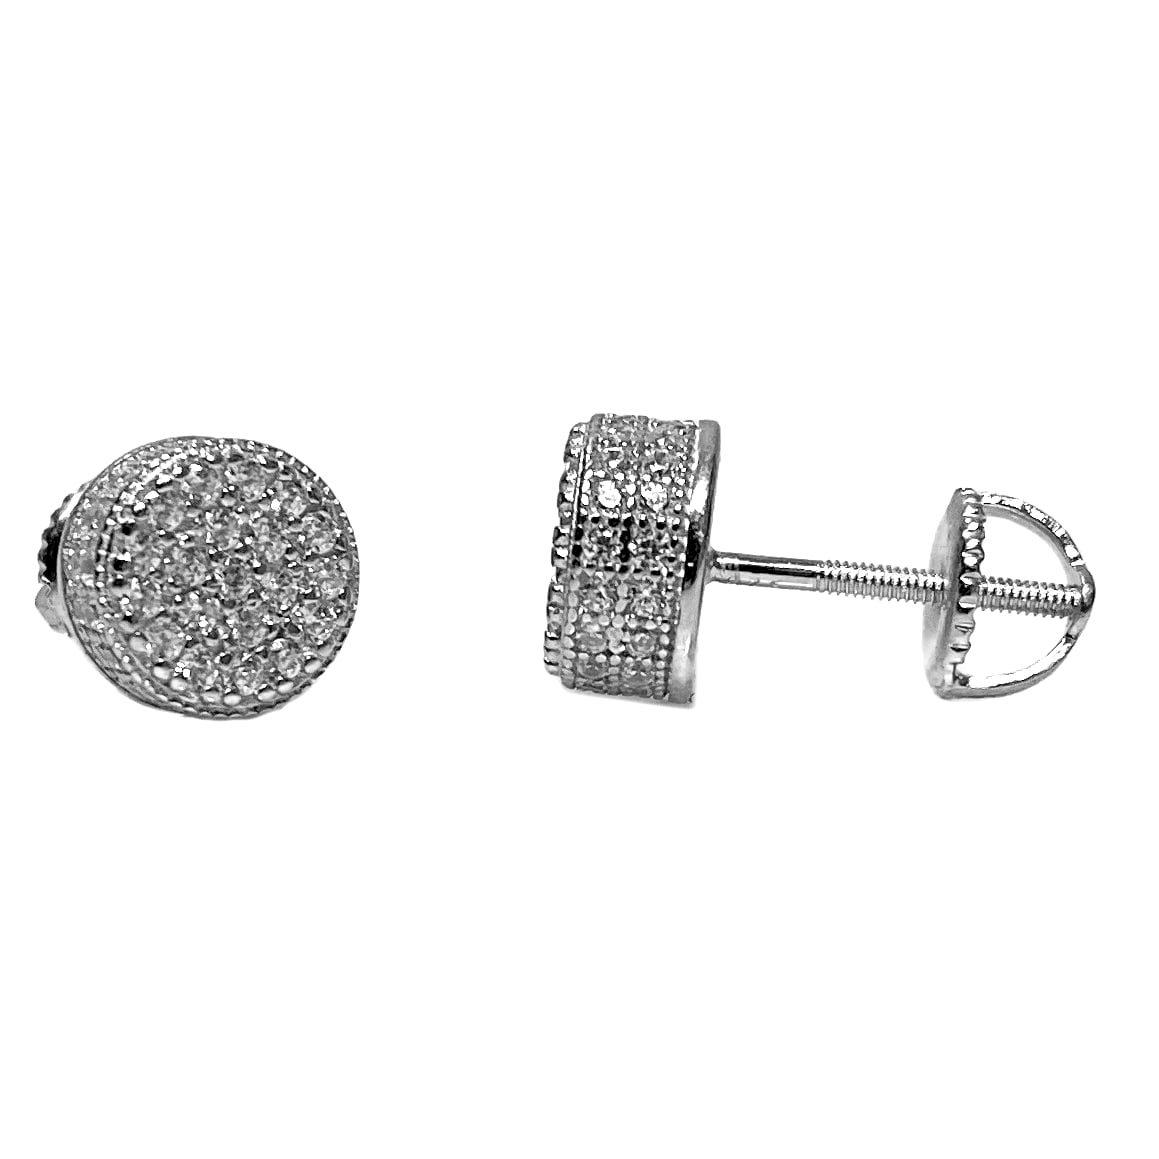 Mens White Gold 925 Sterling Silver Iced Diamond Hip Hop Round Stud Earrings 8mm 